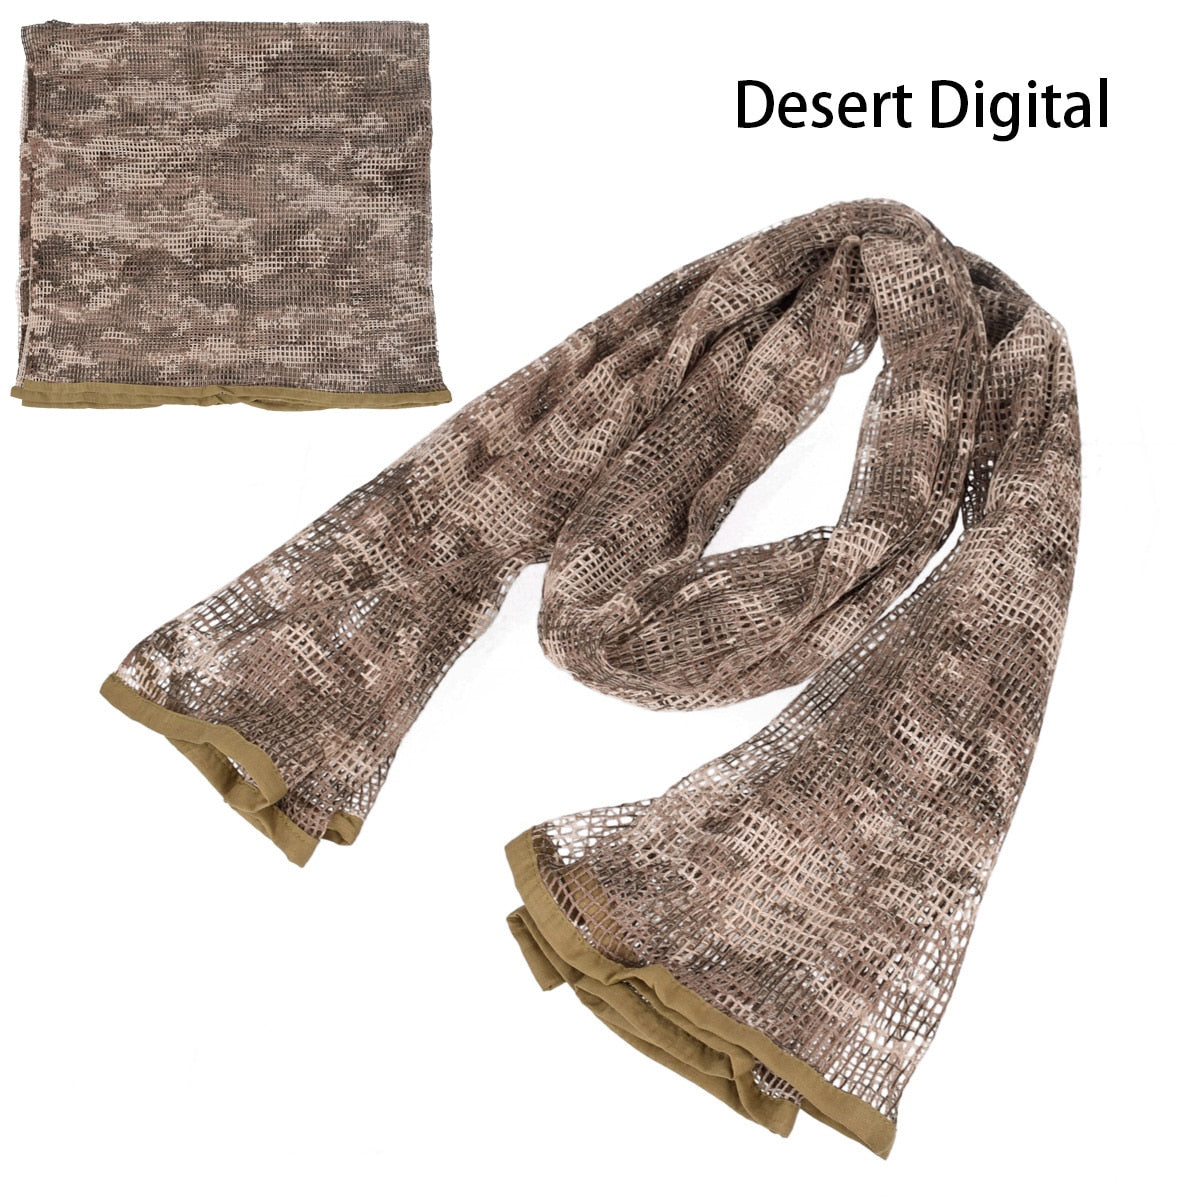 Scarf Cotton Military Camouflage Tactical Mesh Scarf Sniper Face Scarf Veil Camping Hunting Multi Purpose Hiking Scarve